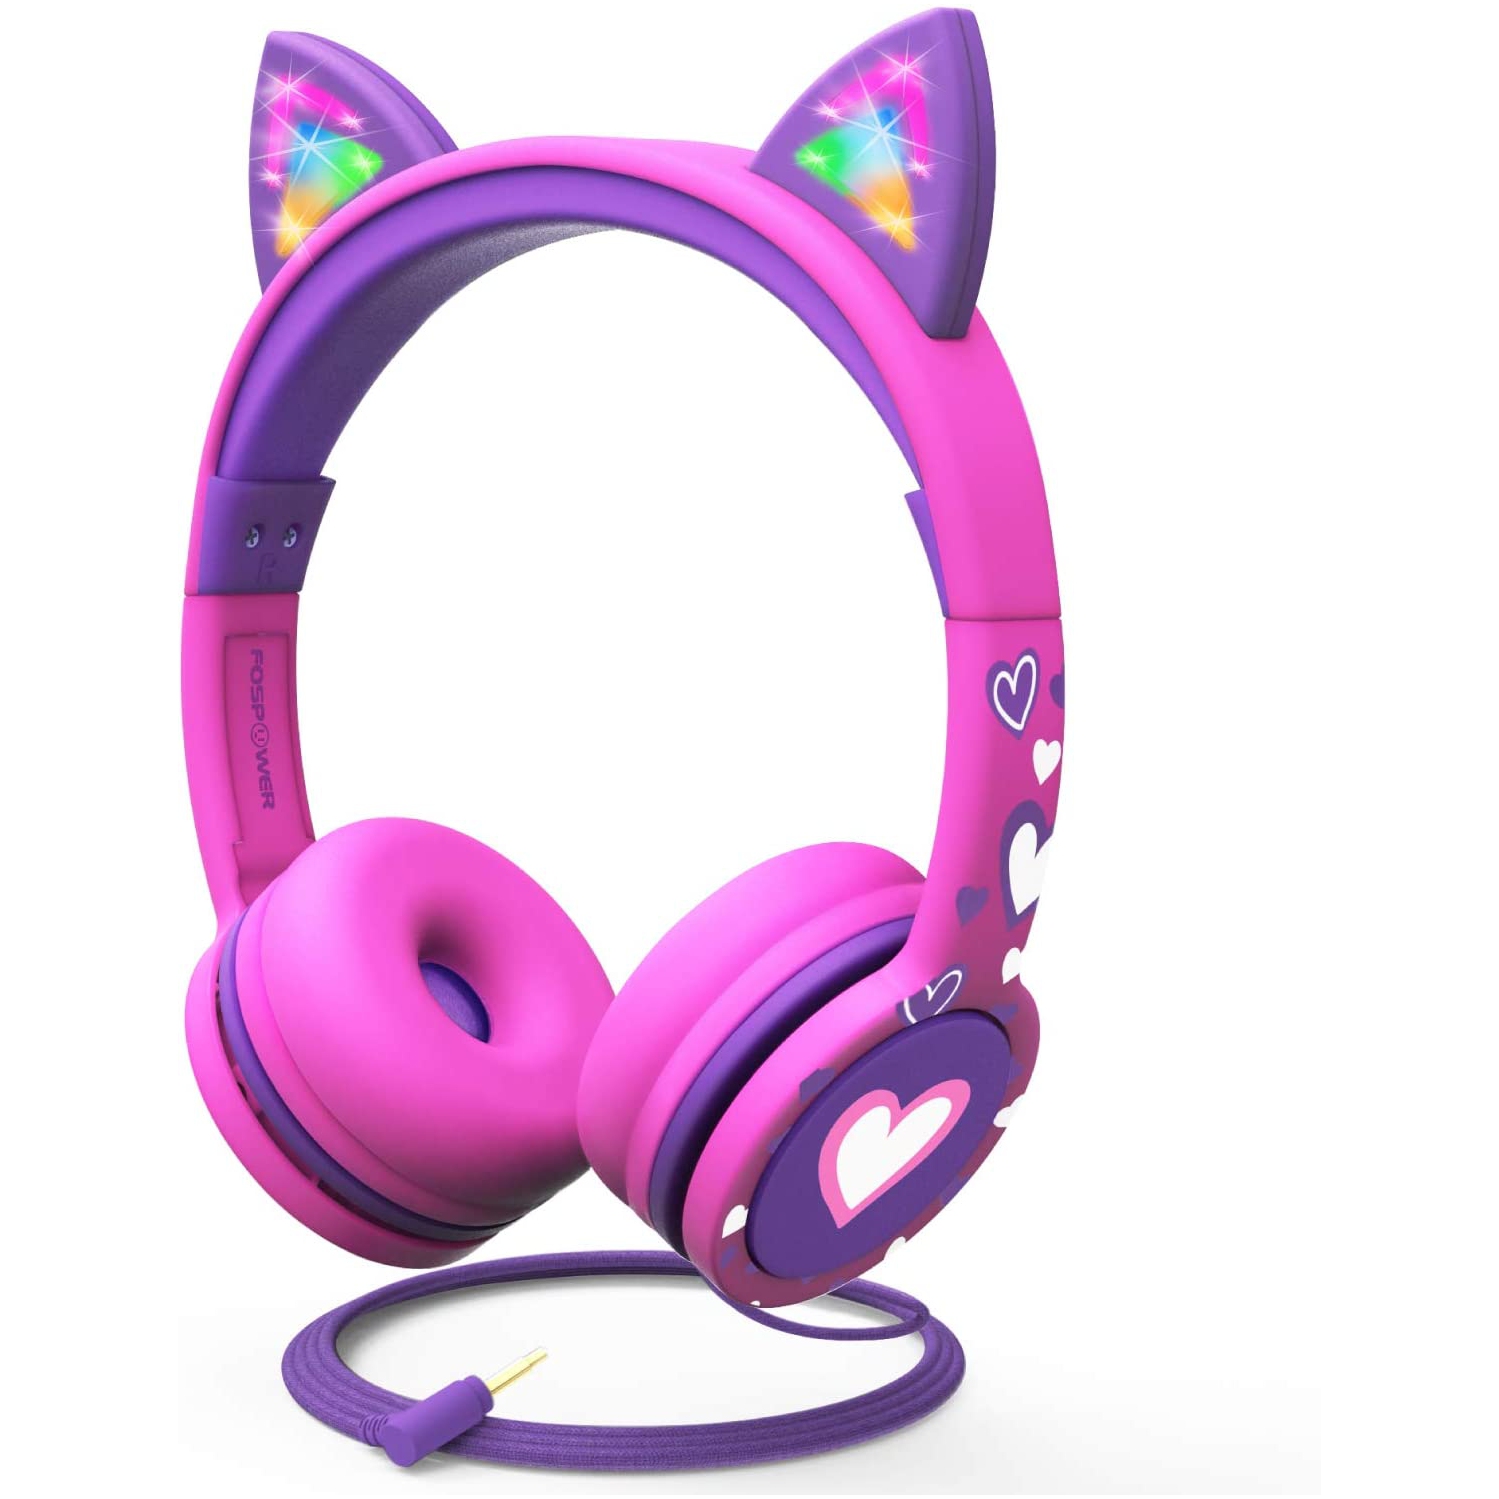 Kids Headphones with LED Cat Ears, 3.5mm On-Ear Wired Headset with Laced Cables for Smartphones, PC, Tablet, and Laptop (Max Volume 85dB) - Pink